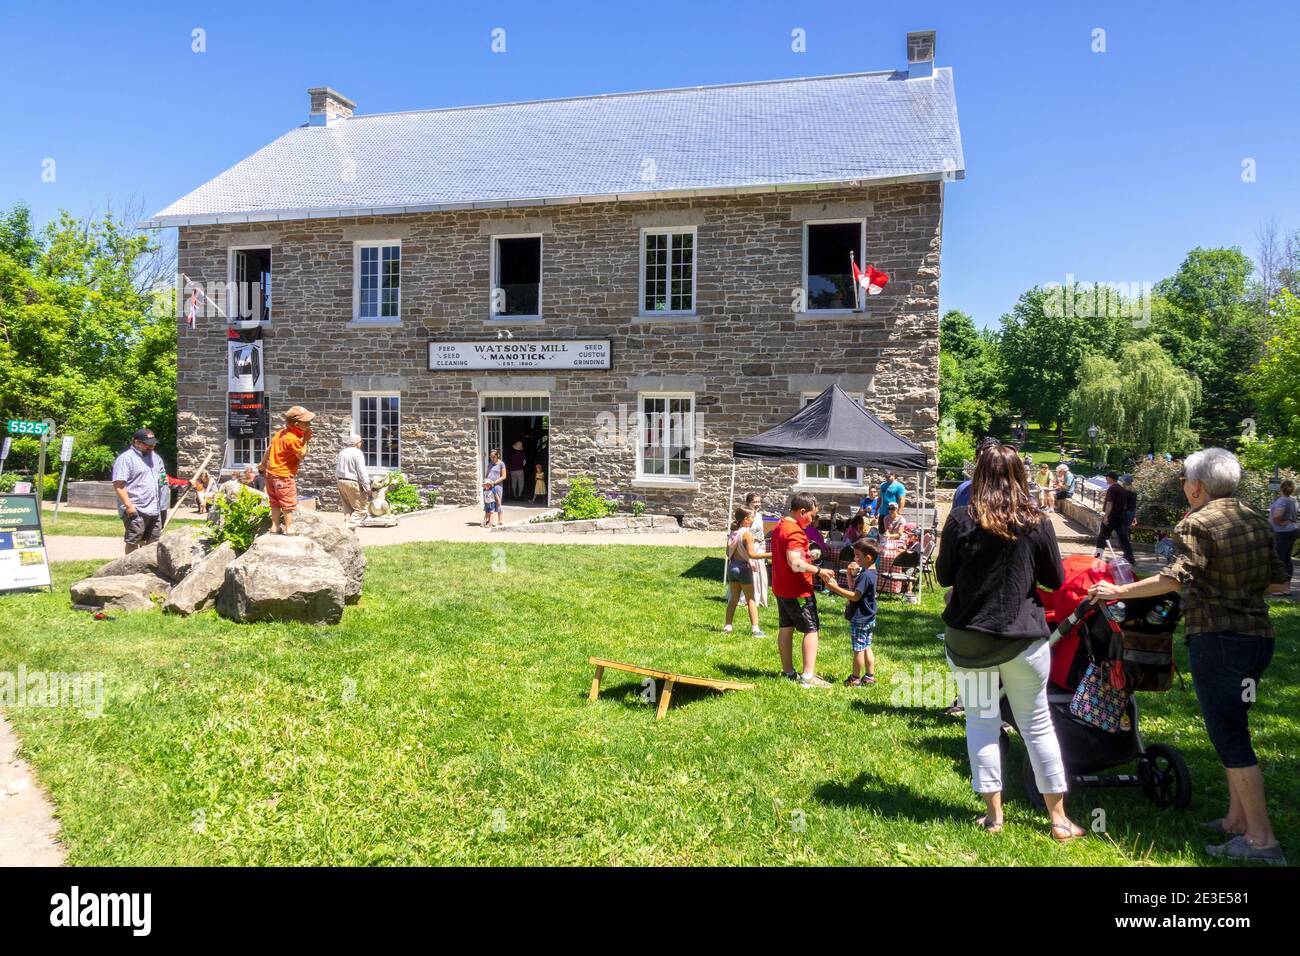 Dickinson Days At Watson's Mill In Manotick A Festival And Open House During The First Weekend Of June. June 2018. Stock Photo